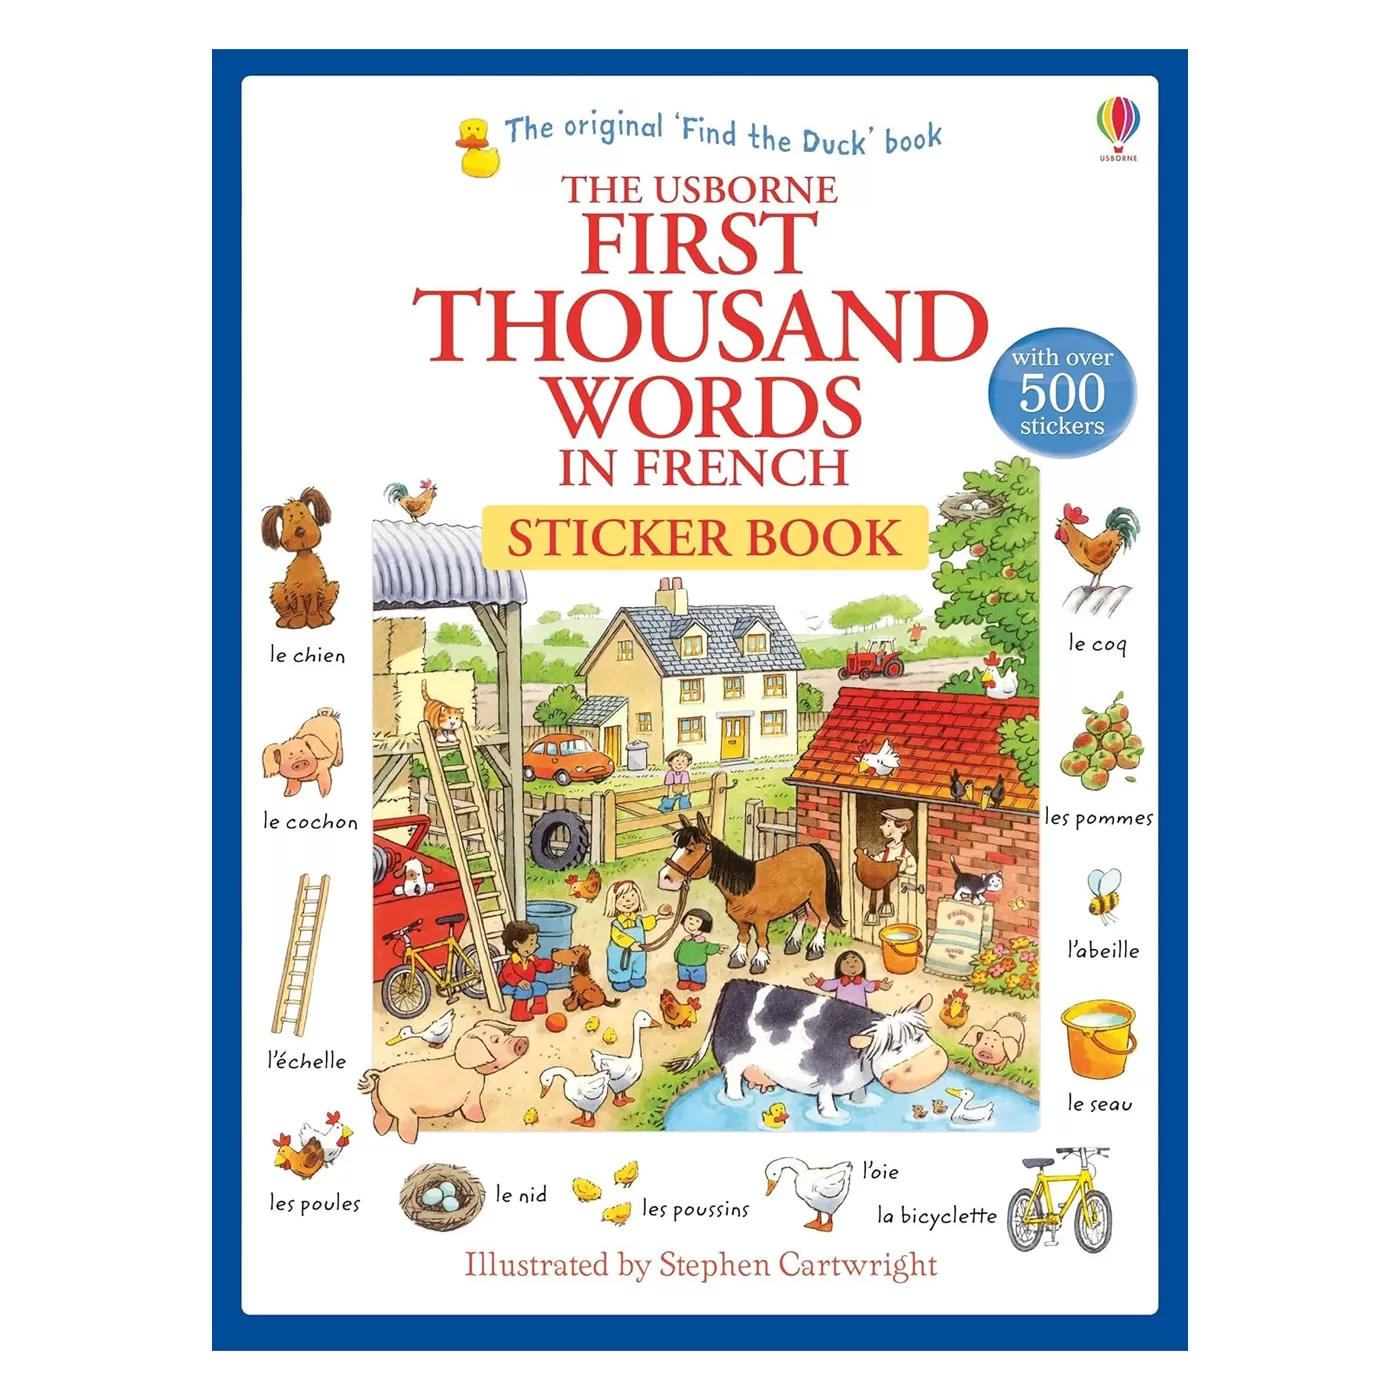 USBORNE First Thousand Words in French Sticker Book